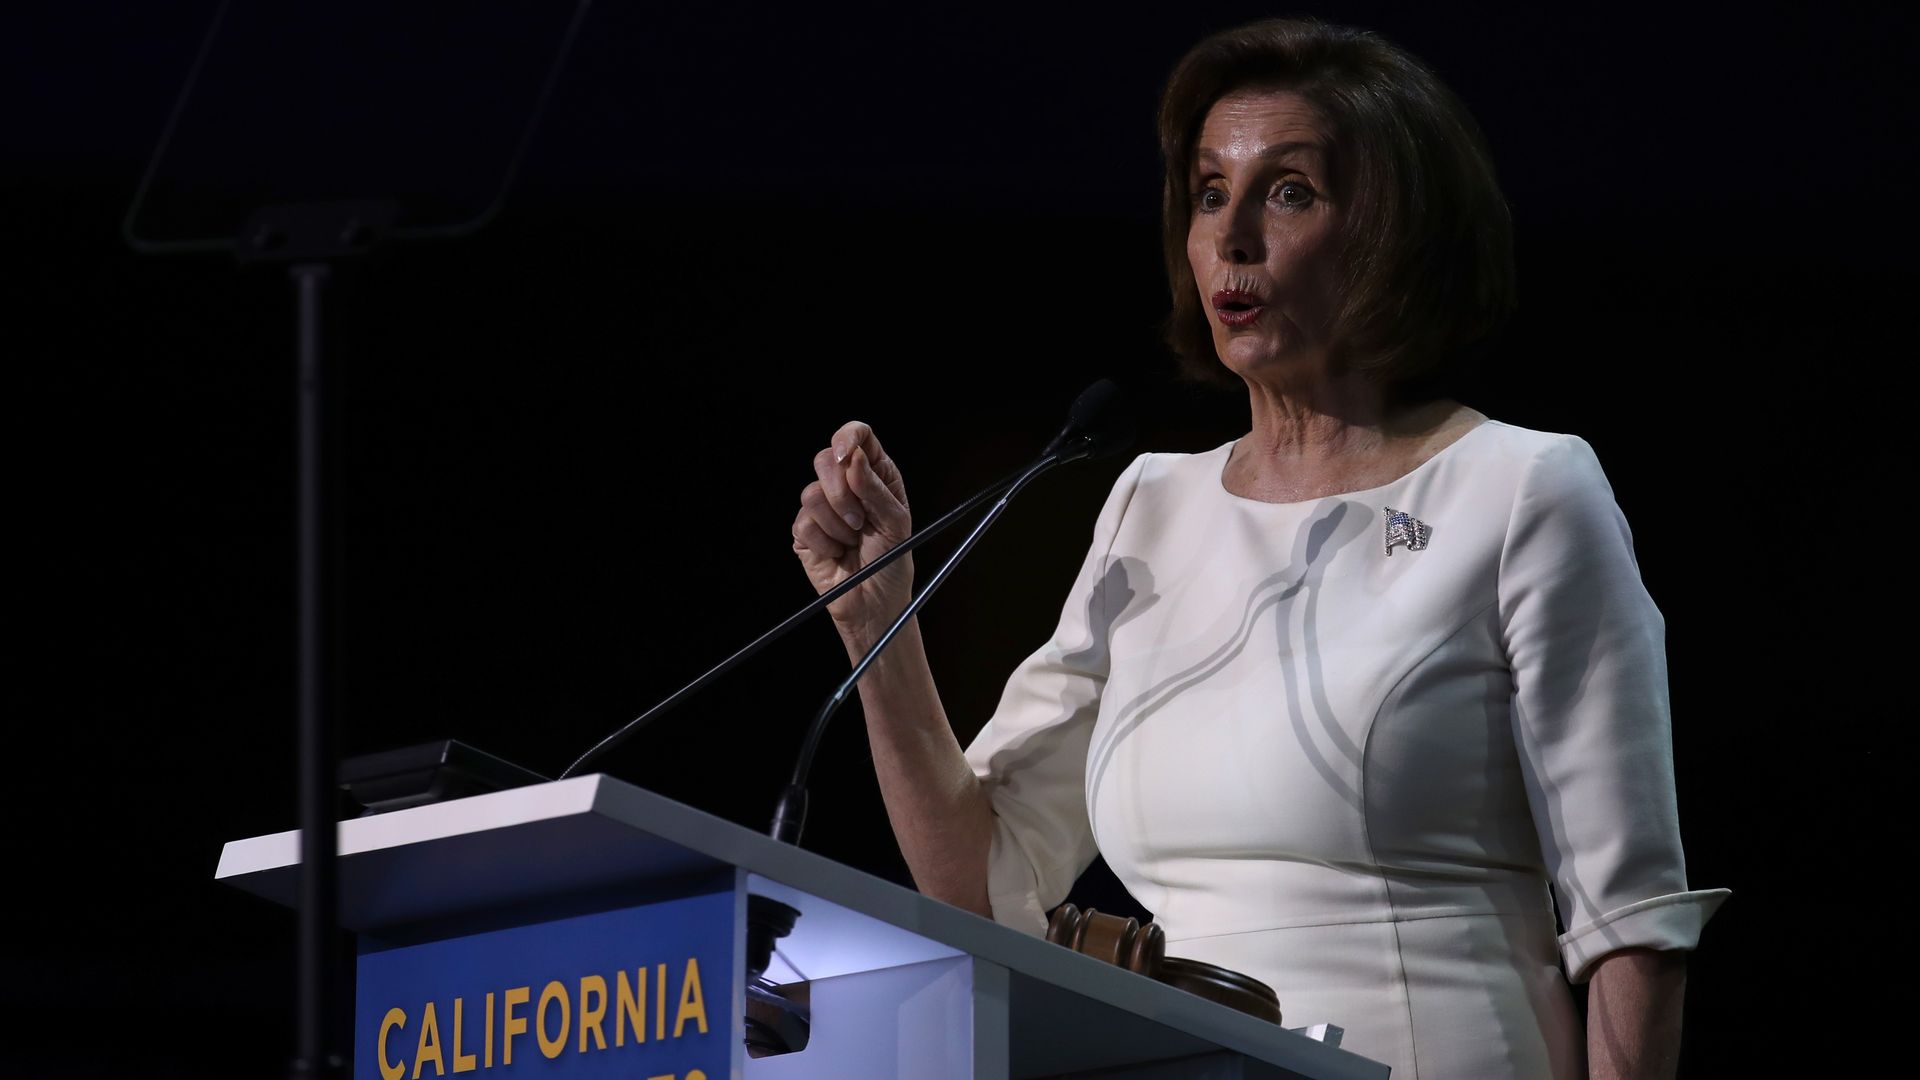 House Speaker Nancy Pelosi (D-CA) speaks during the California Democrats 2019 State Convention at the Moscone Center on June 01, 2019 in San Francisco, California. 